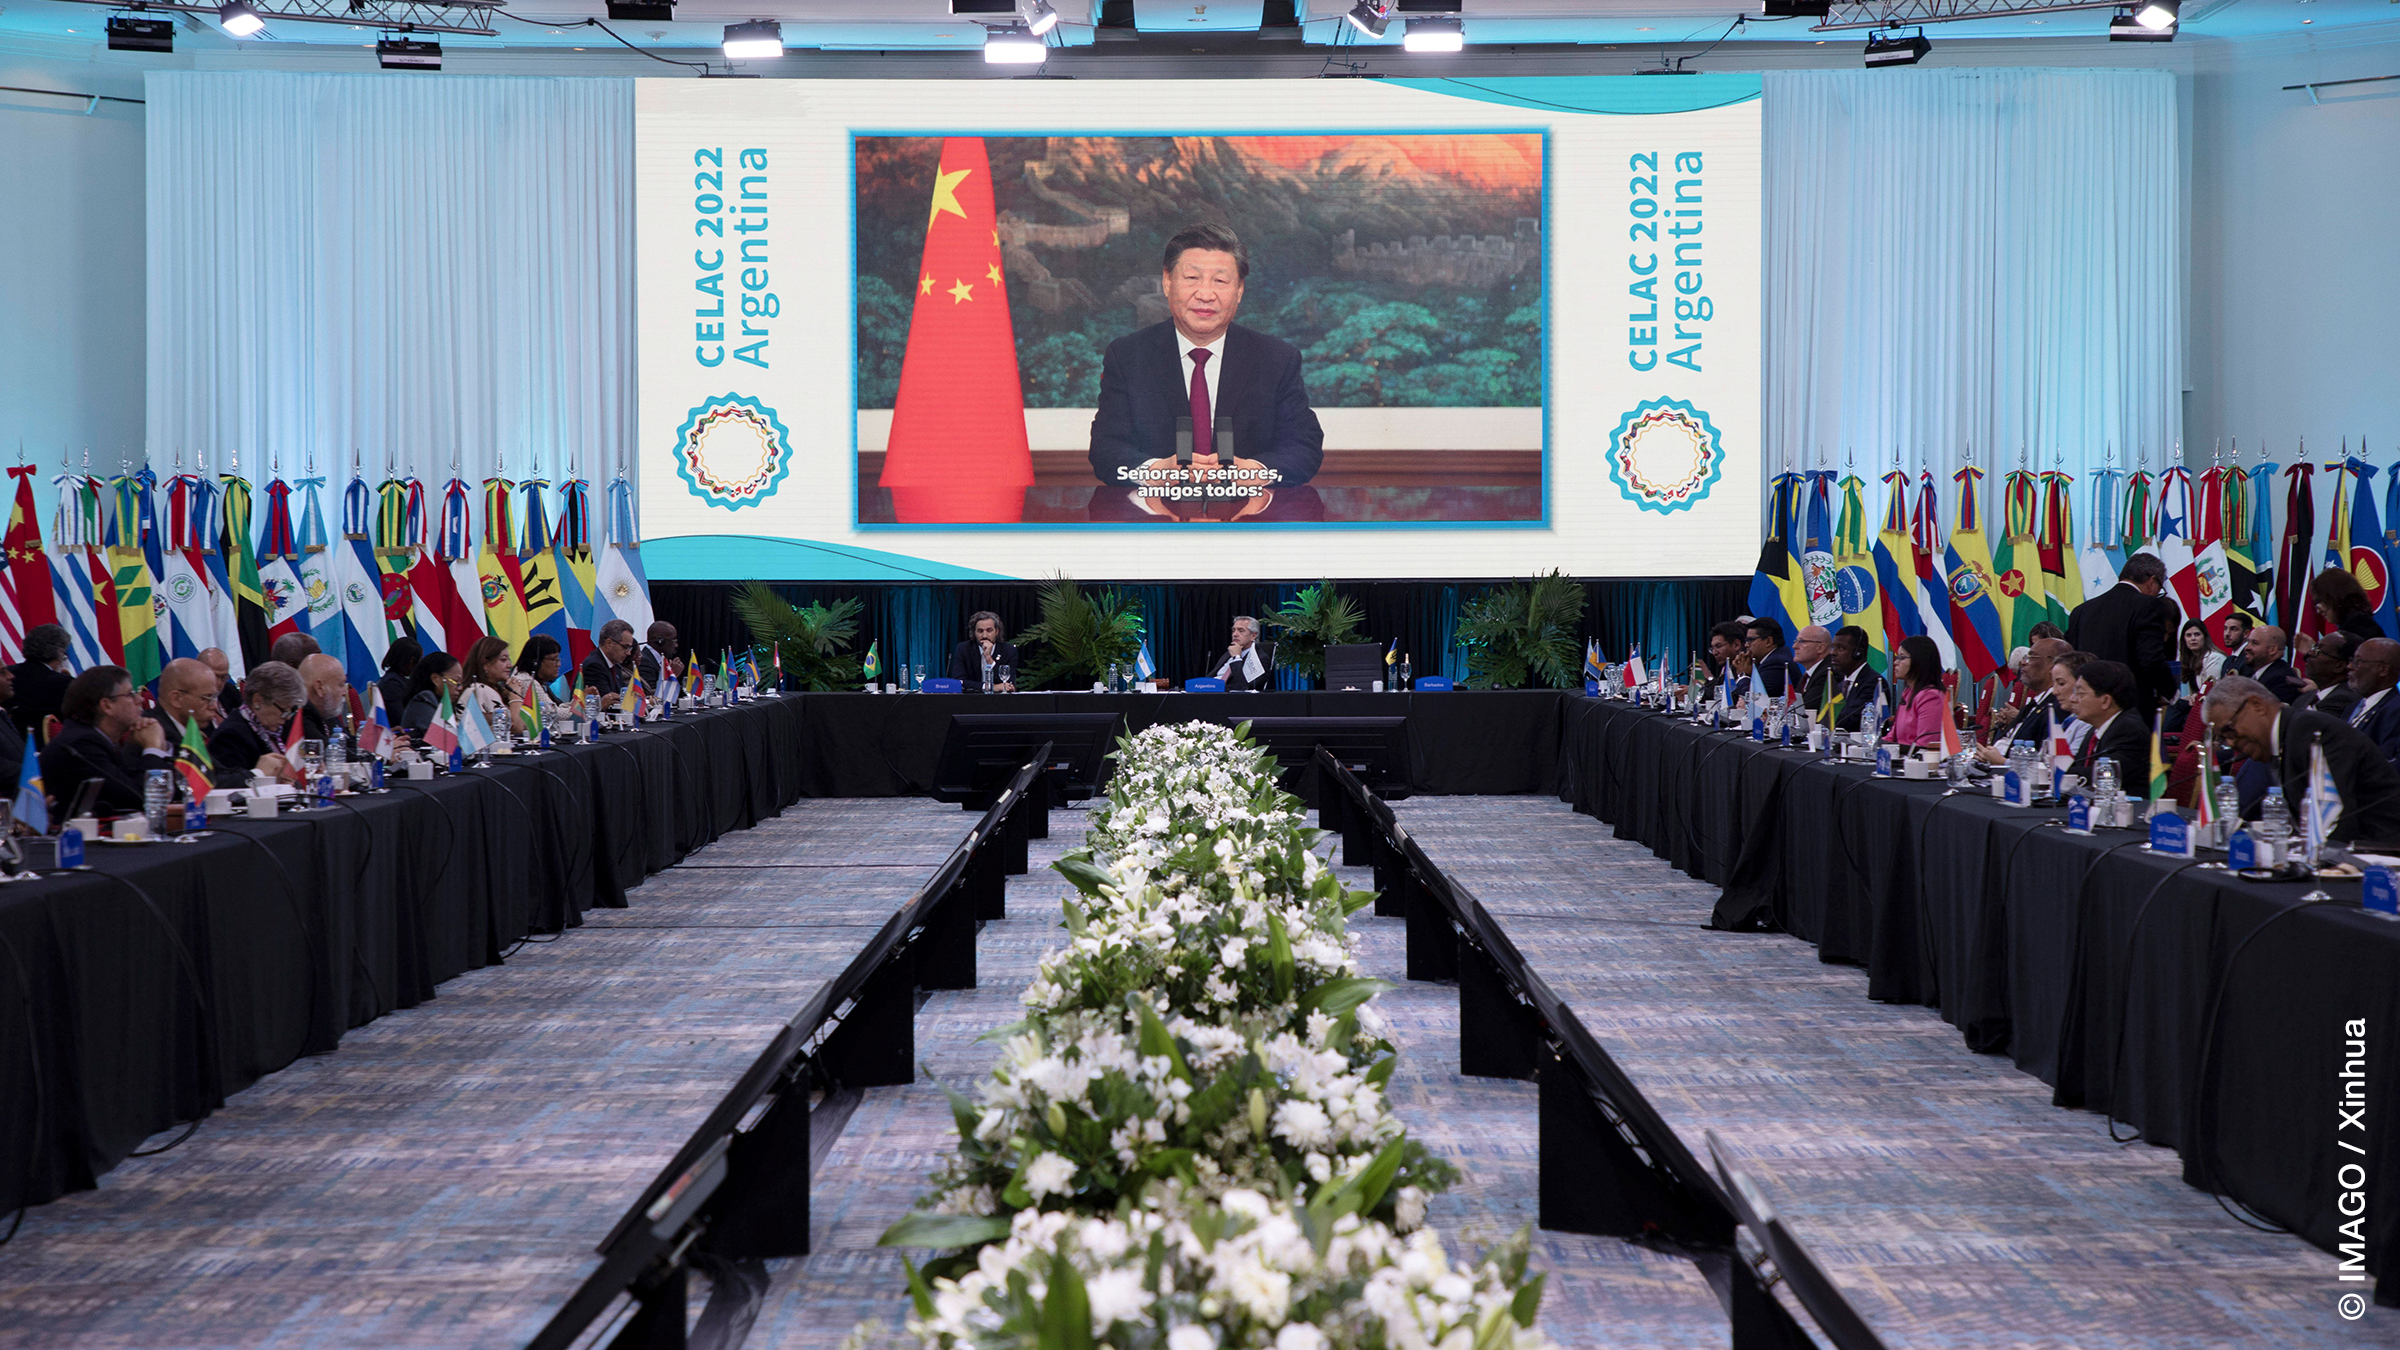 Upon the invitation of President Alberto Fernandez of Argentina, rotating president of the CELAC, Chinese President Xi Jinping delivers a video address at the seventh Summit of CELAC. Buenos Aires, capital of Argentina, on Jan. 24, 2023.